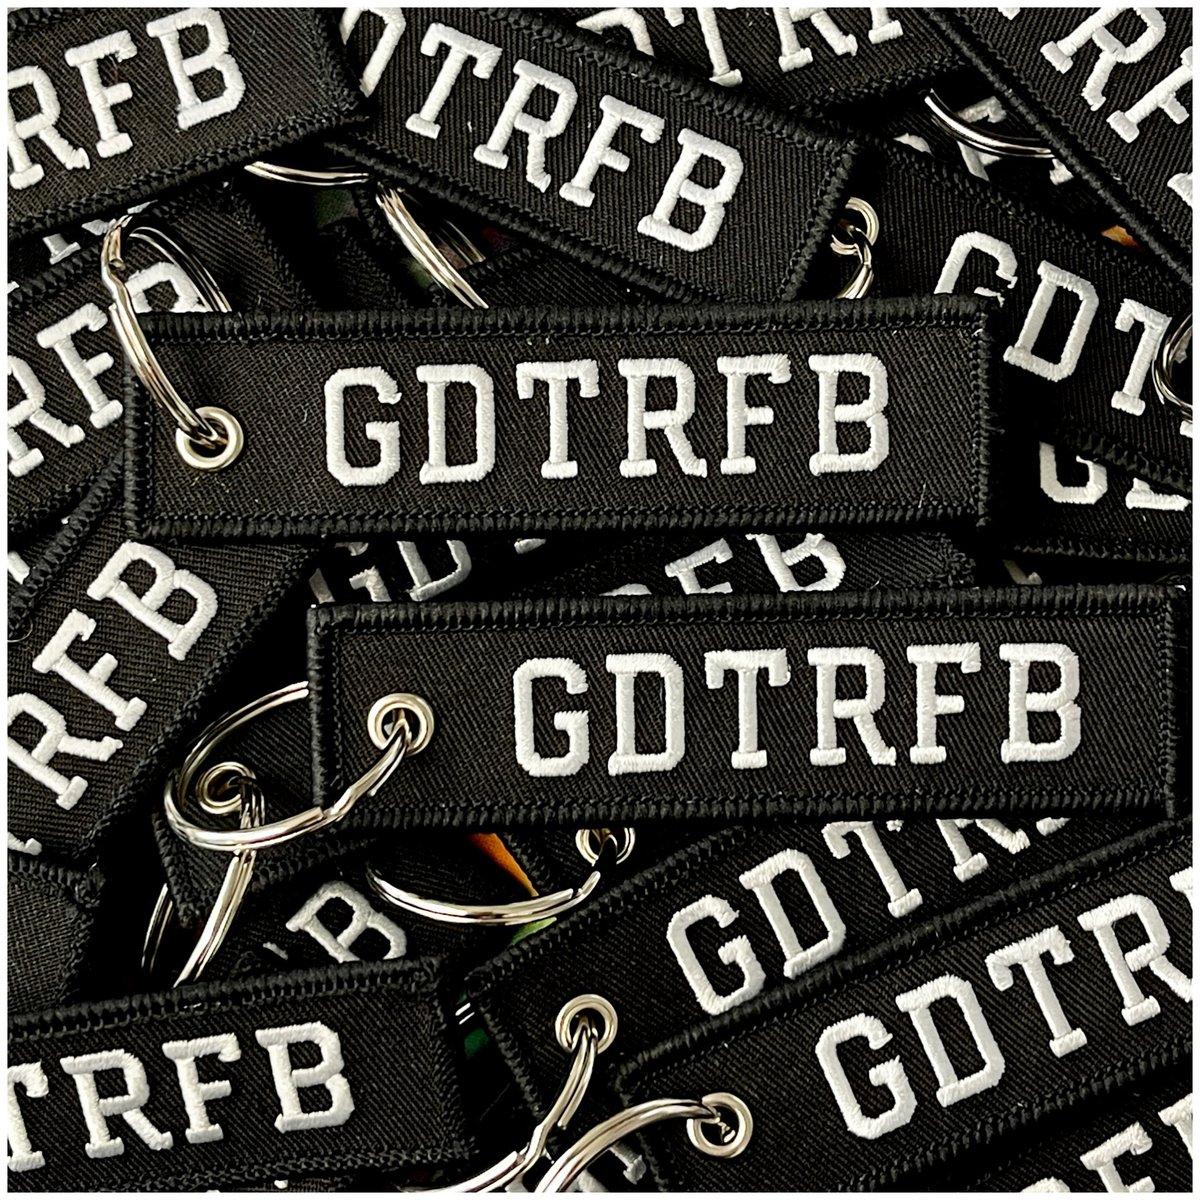 GDTRFB Embroidered Patch Key Chain!